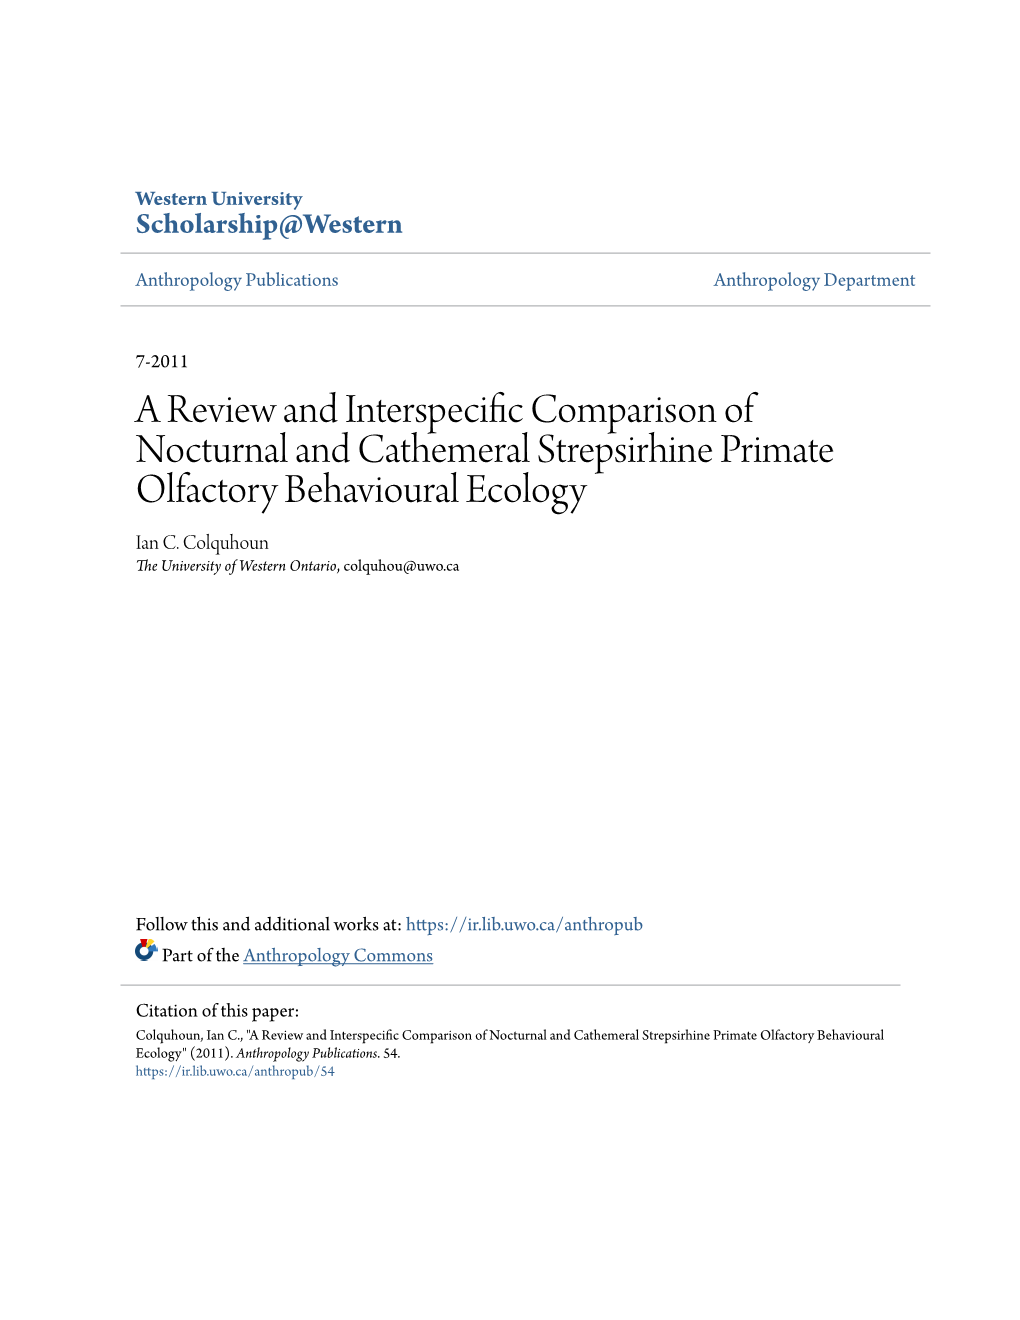 A Review and Interspecific Comparison of Nocturnal And